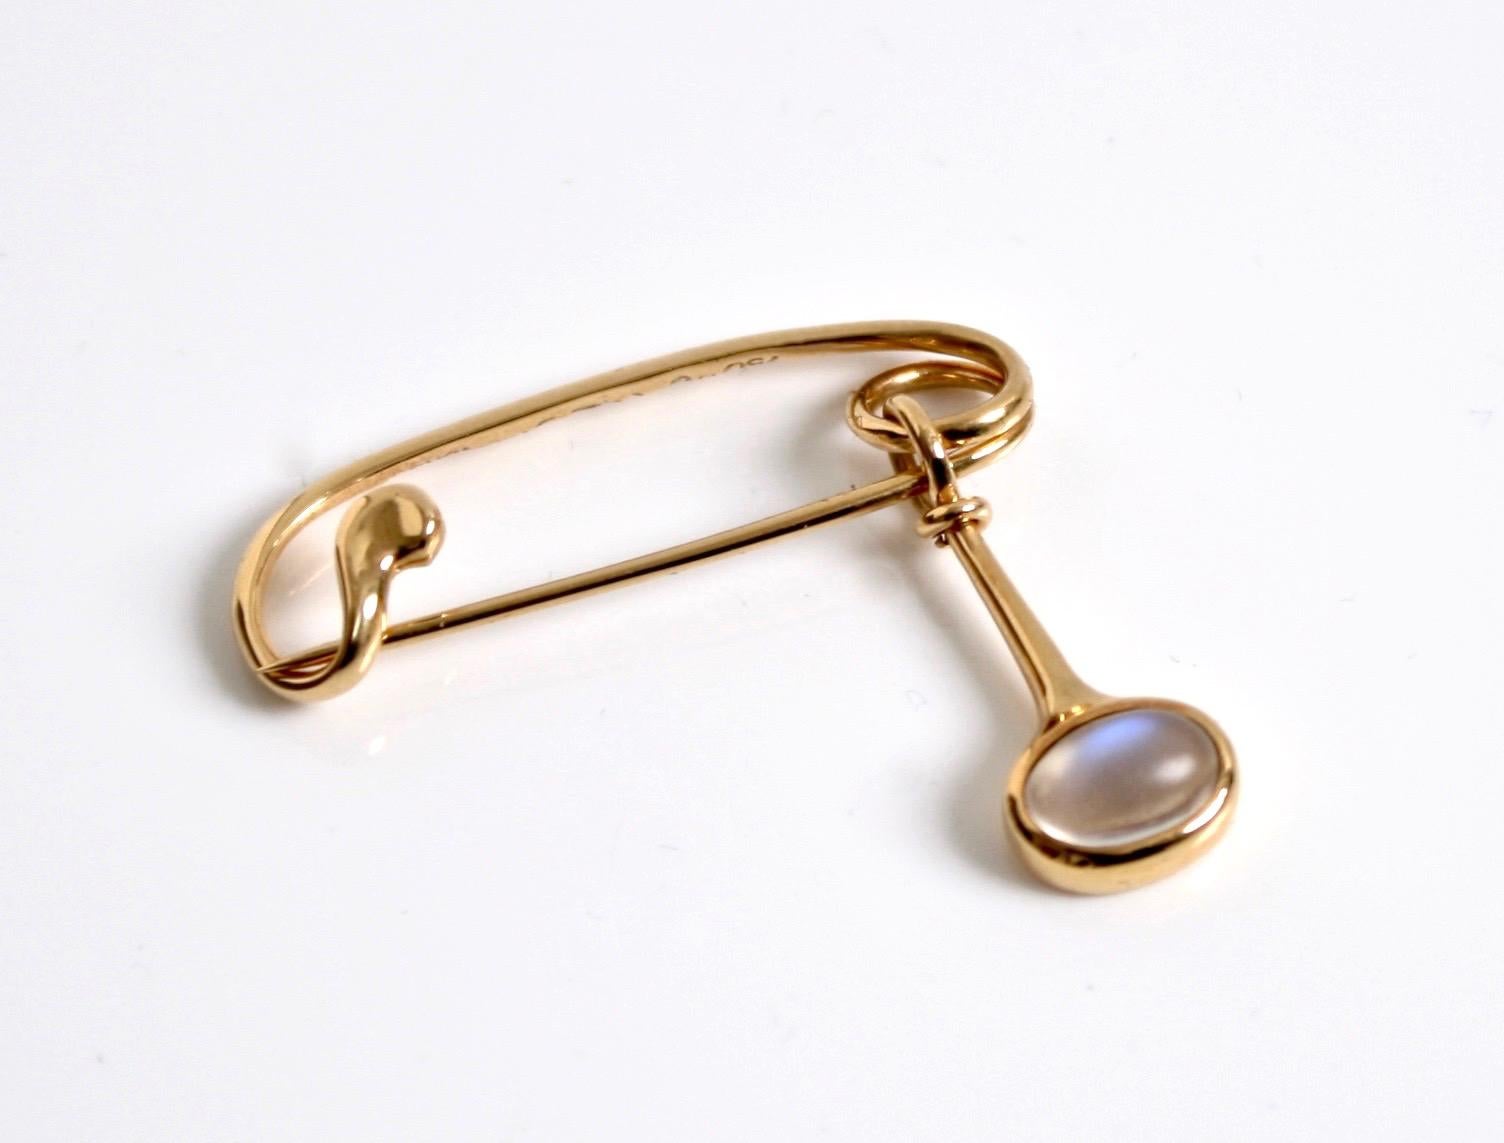 Early Georg Jensen 18k Gold & Moonstone brooch designed by Vivianna Torun Bulow-Hube Denmark c.1960 
Design number 1425 comes in the original Georg Jensen box
Very substantial piece moonstone is a beautiful colour